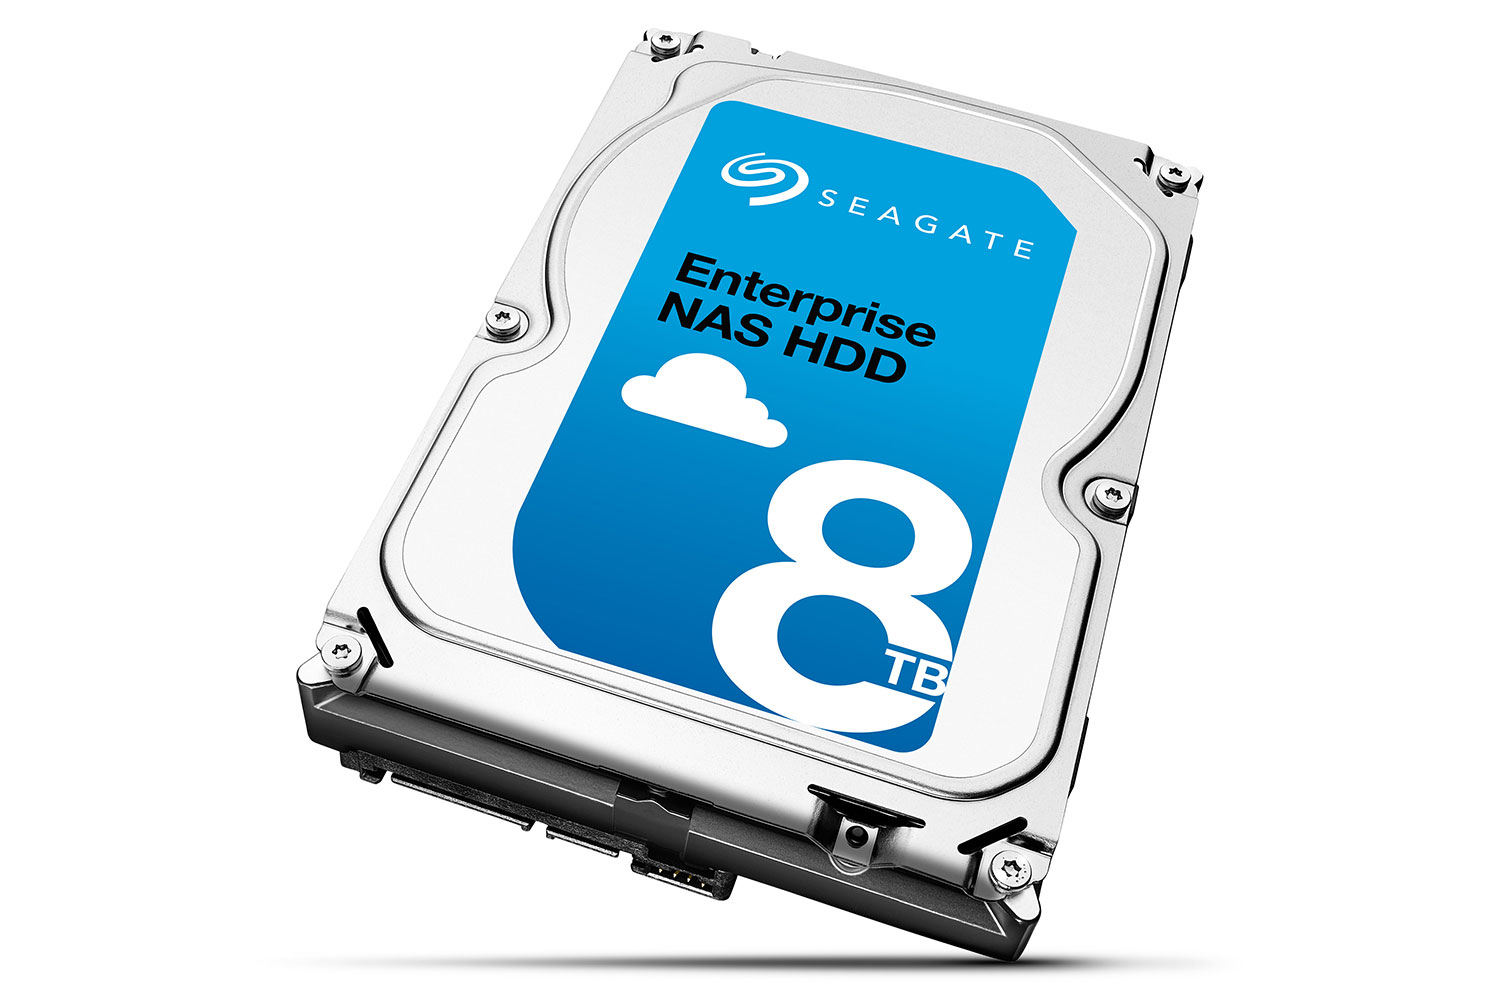 seagate targets small and medium sized businesses with three new 8tb hdd options enterprise nas dynamic hi res